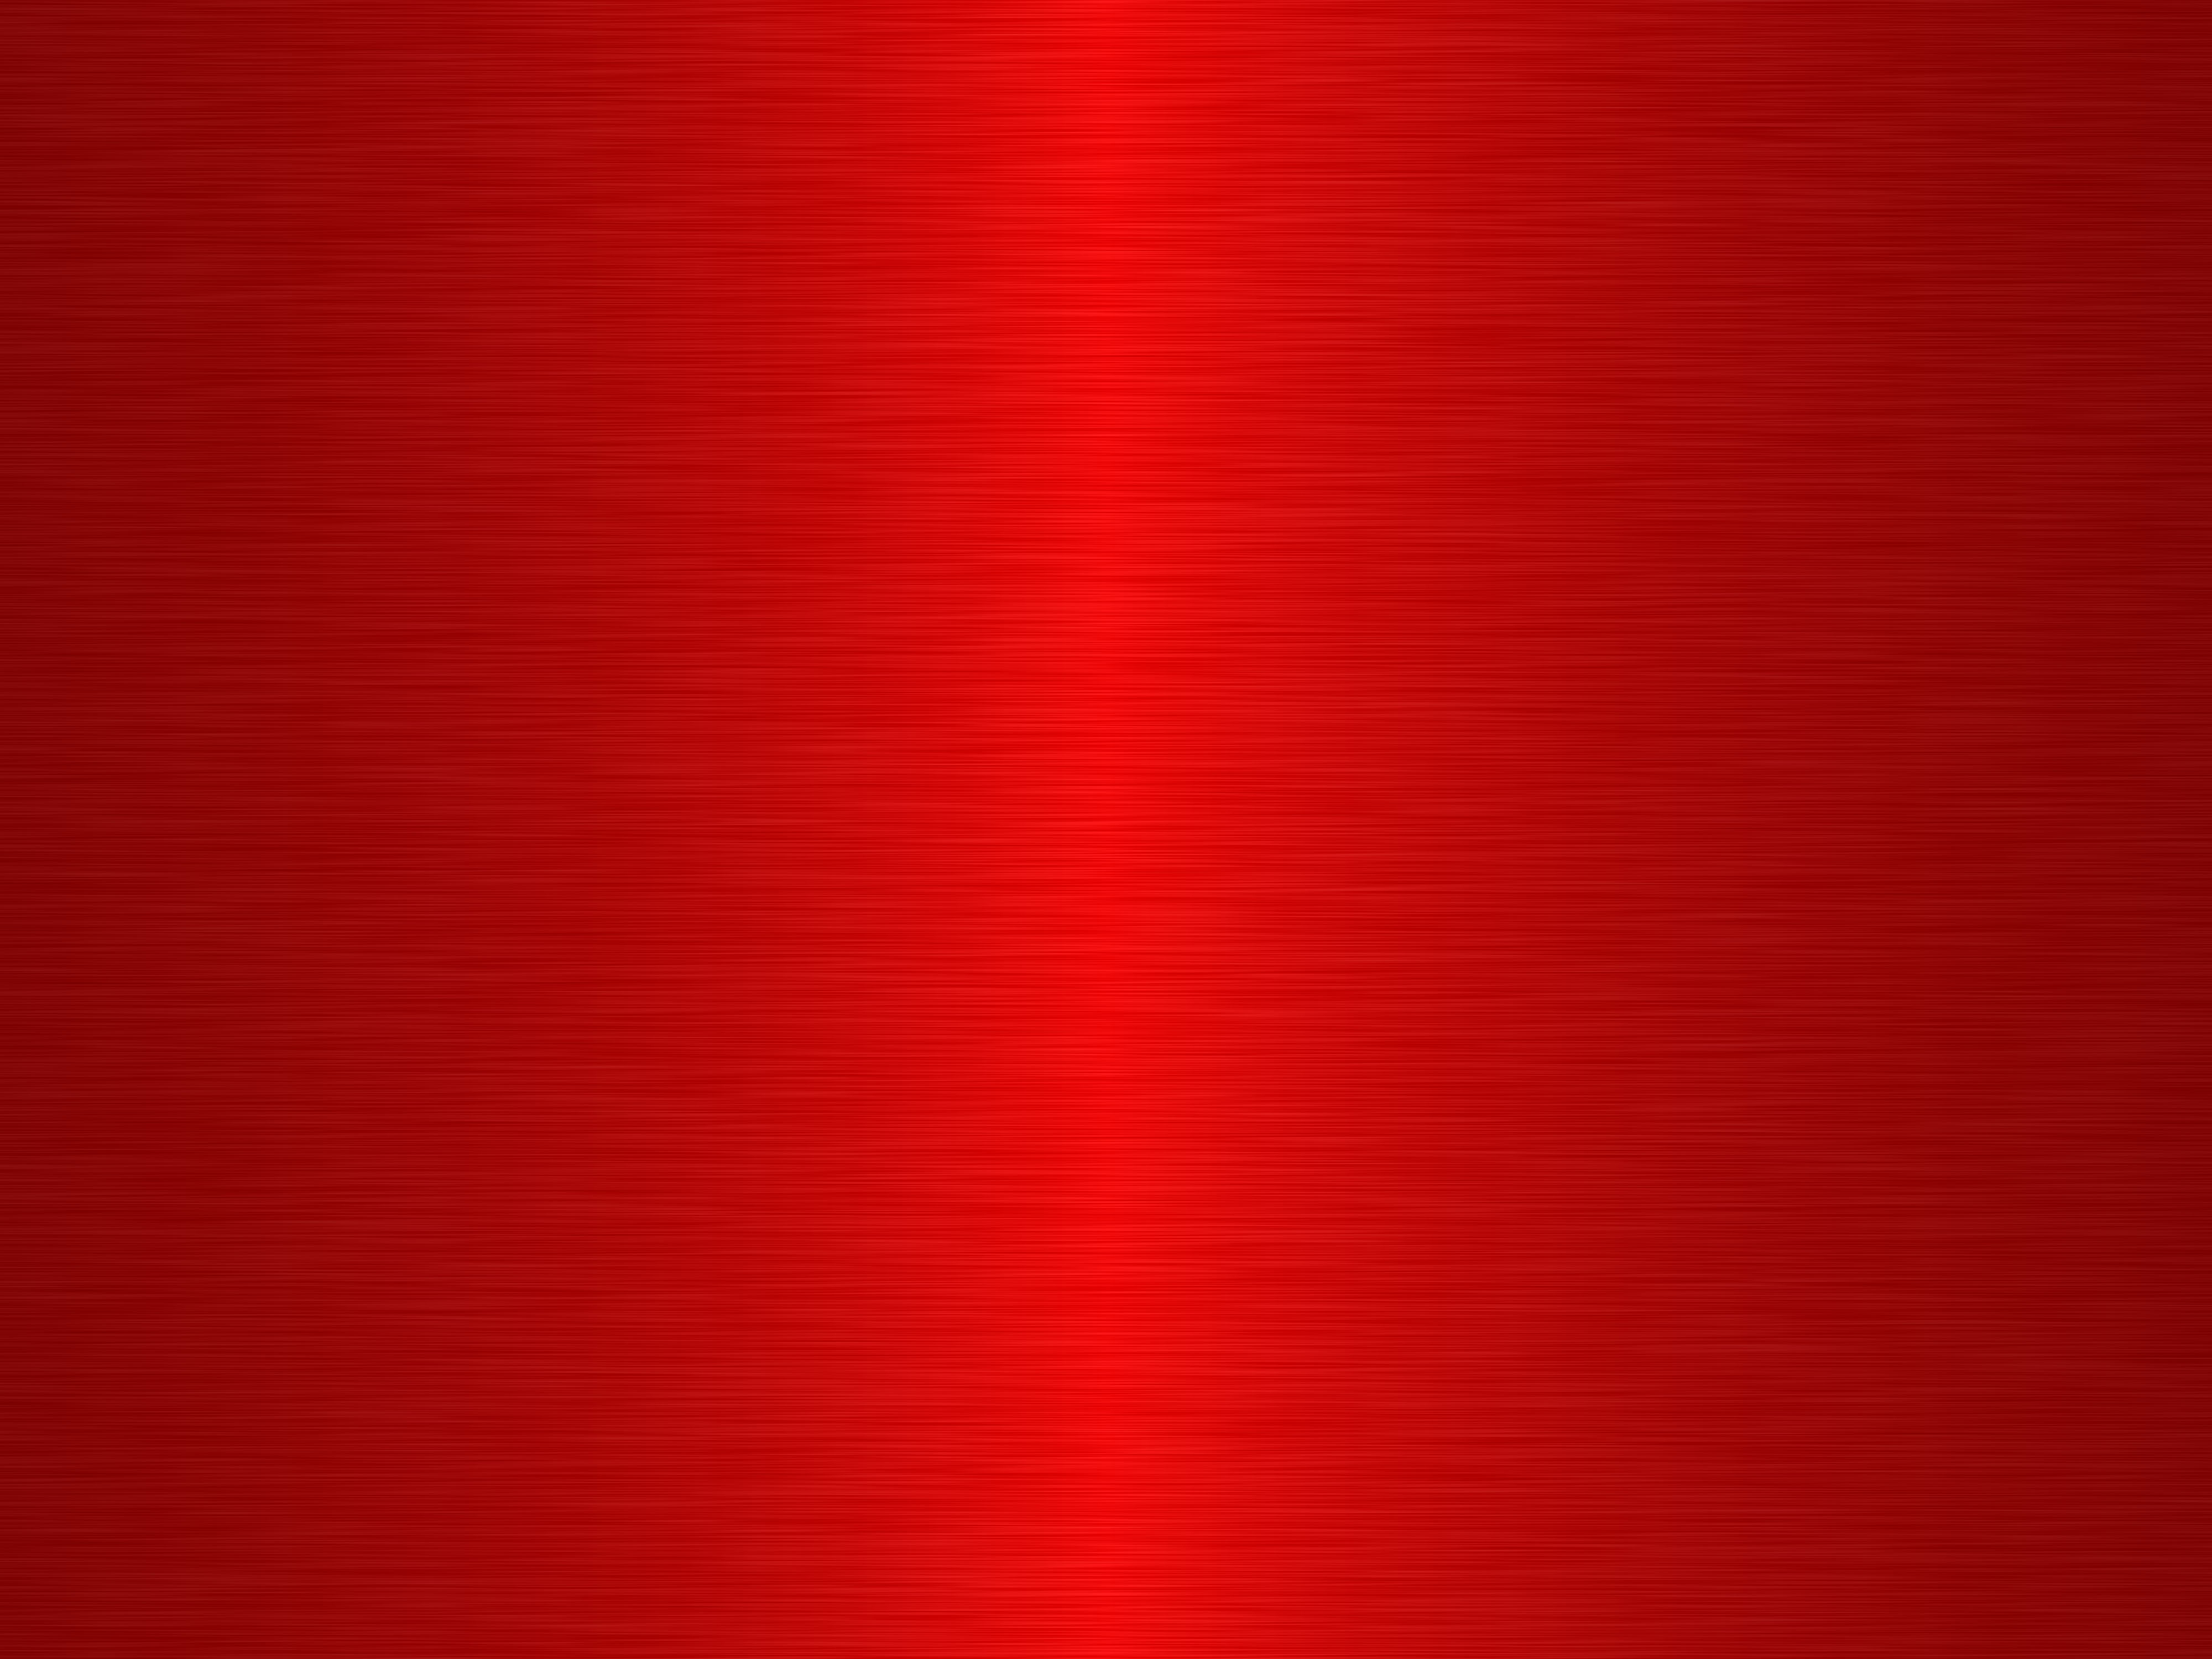 3840x21602019 Simple Red Texture Pattern 3840x21602019 Resolution Wallpaper,  HD Abstract 4K Wallpapers, Images, Photos and Background - Wallpapers Den